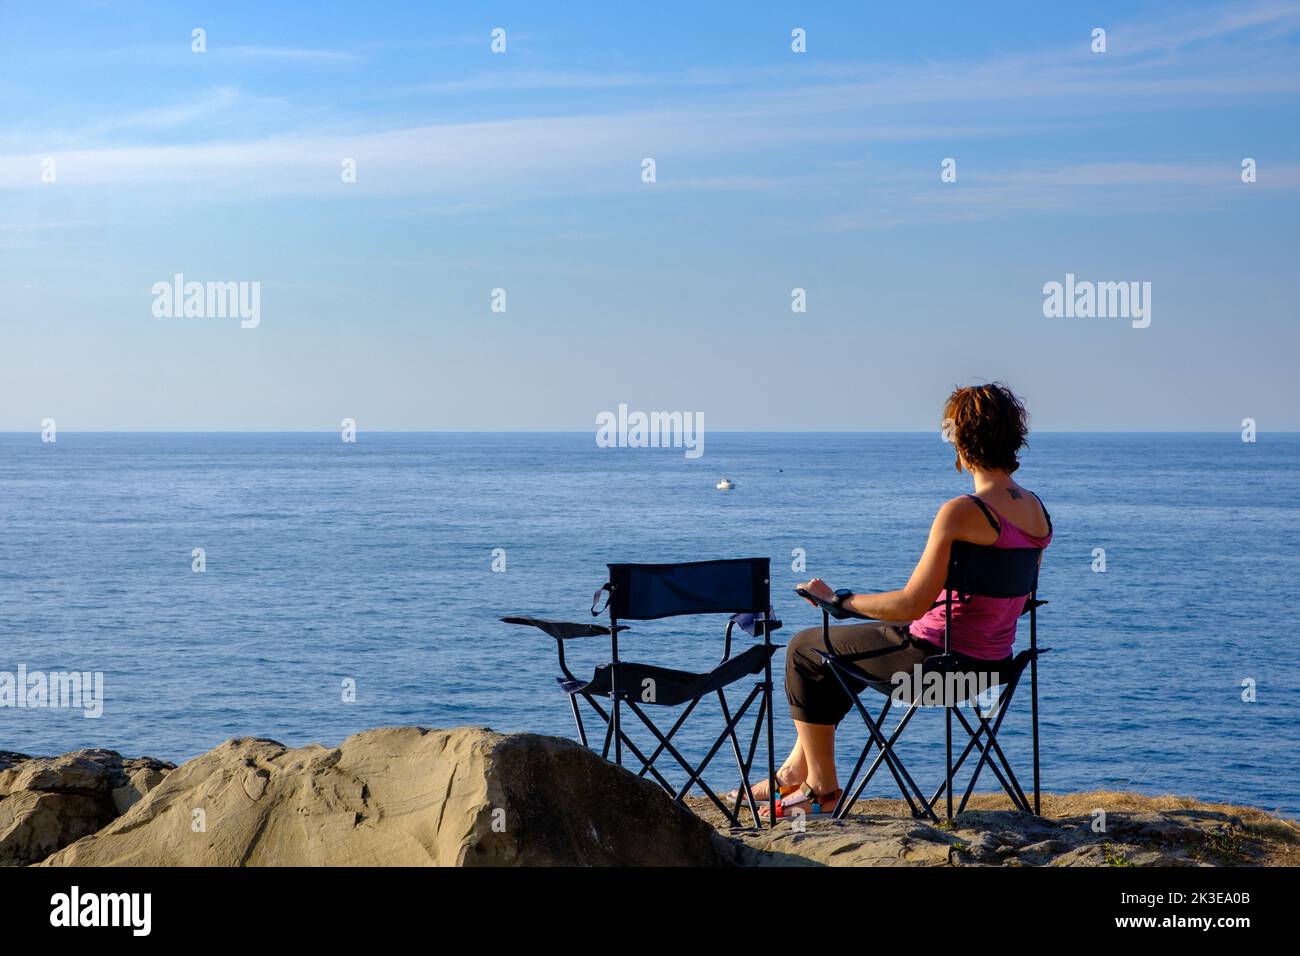 Woman relaxing in front of the Atlantic Ocean near Zumaia, Basque Country, Spain Stock Photo